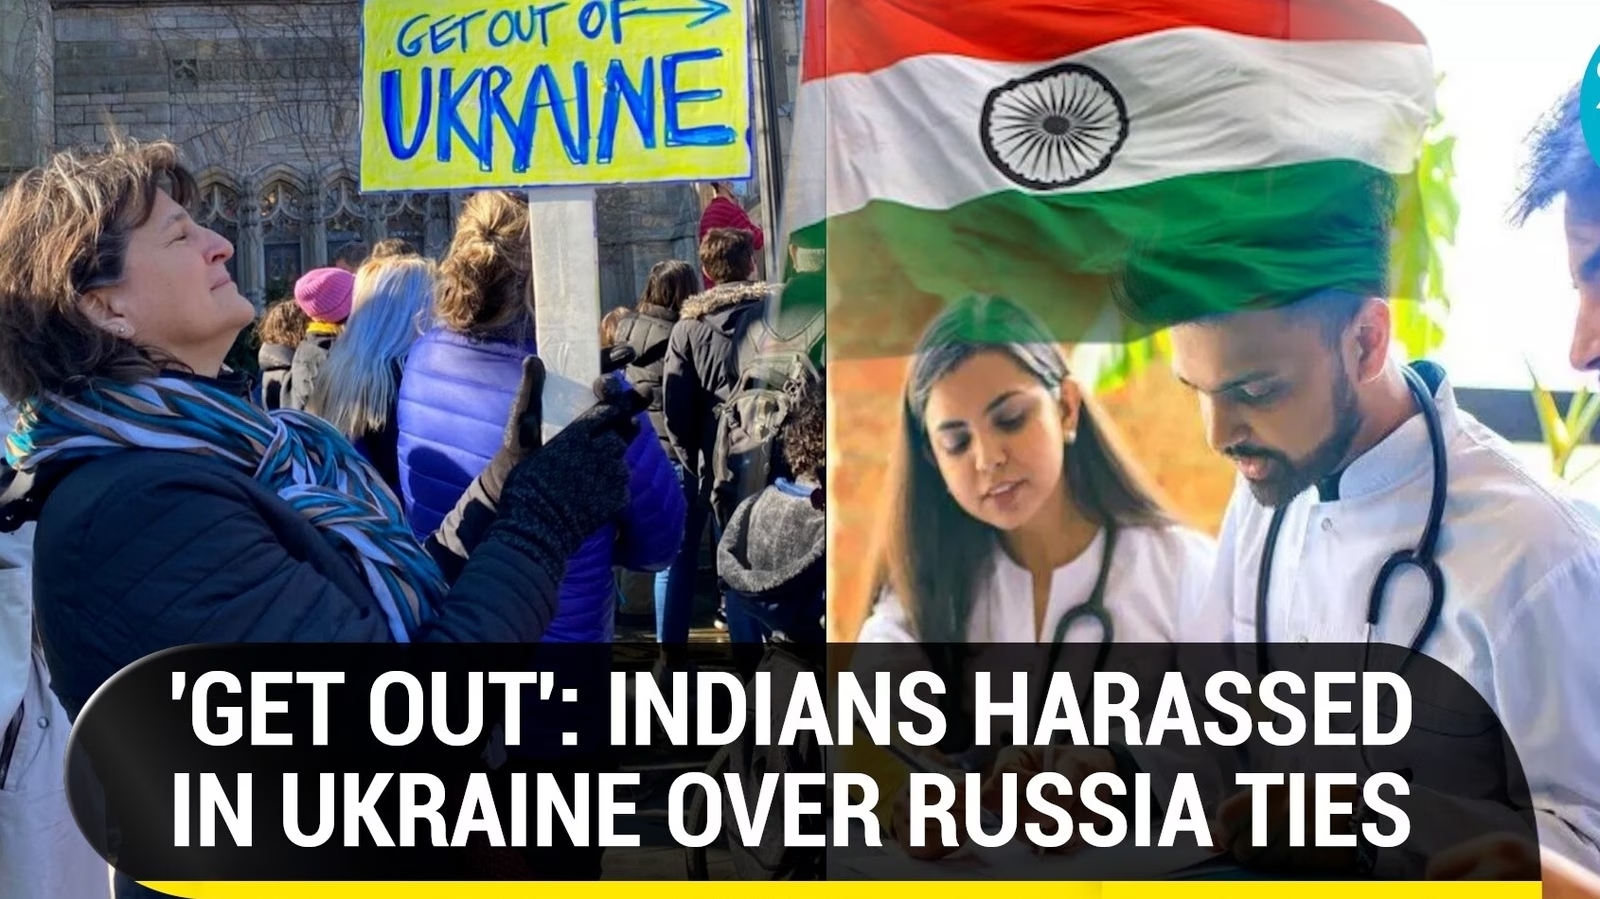 Statement ‘You good friends of Russia get out’ reflects Indian students in Ukraine are troubled